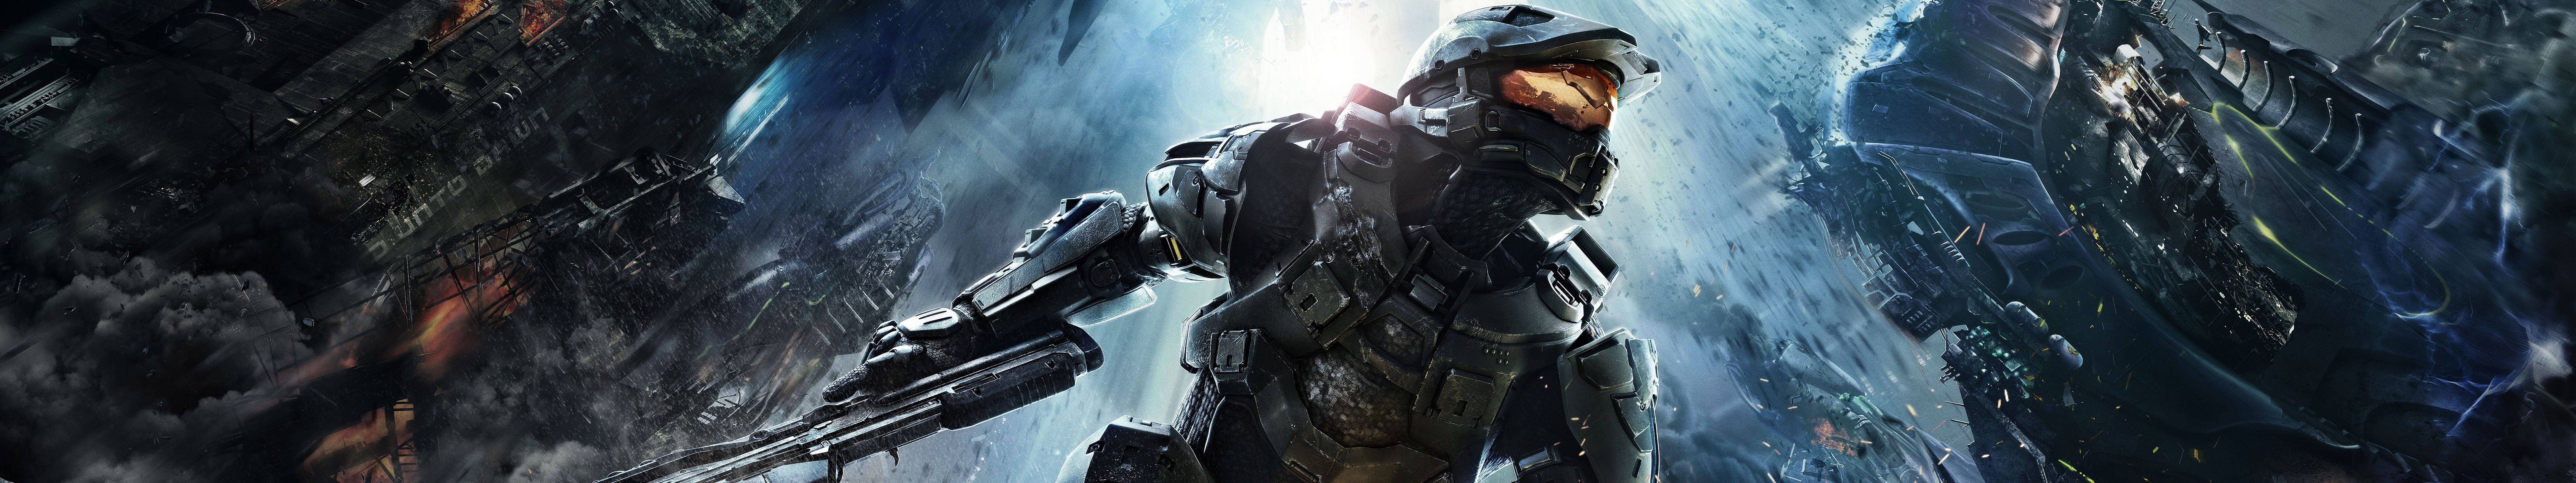 Halo game screenshot, Halo 4, masterchief, men, people, armed Forces